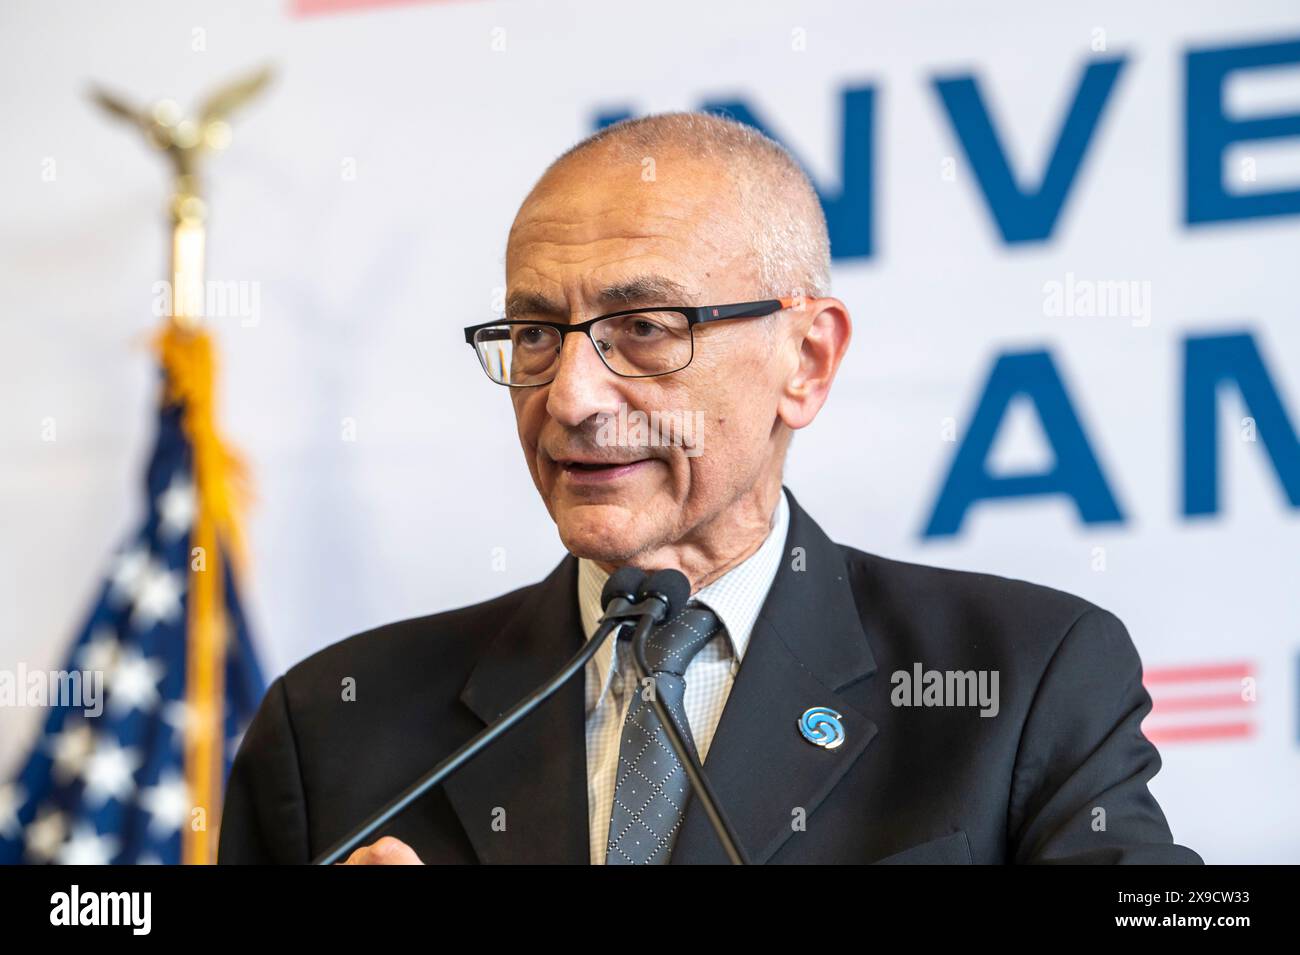 NEW YORK, NEW YORK - MAY 30: White House Senior Advisor John Podesta speaks during a clean energy affordability announcement at the Andromeda Community Initiative, Long Island City on May 30, 2024 in the Queens Borough of New York City. Governor Kathy Hochul joined U.S. Department of Energy (DOE) Secretary Granholm, White House Senior Advisor John Podesta and Majority Leader U.S. Senator Chuck Schumer to celebrate New York State becoming the first state in the nation to offer the first phase of Inflation Reduction Act (IRA) Home Electrification and Appliance Rebates (HEAR) Program funding to Stock Photo